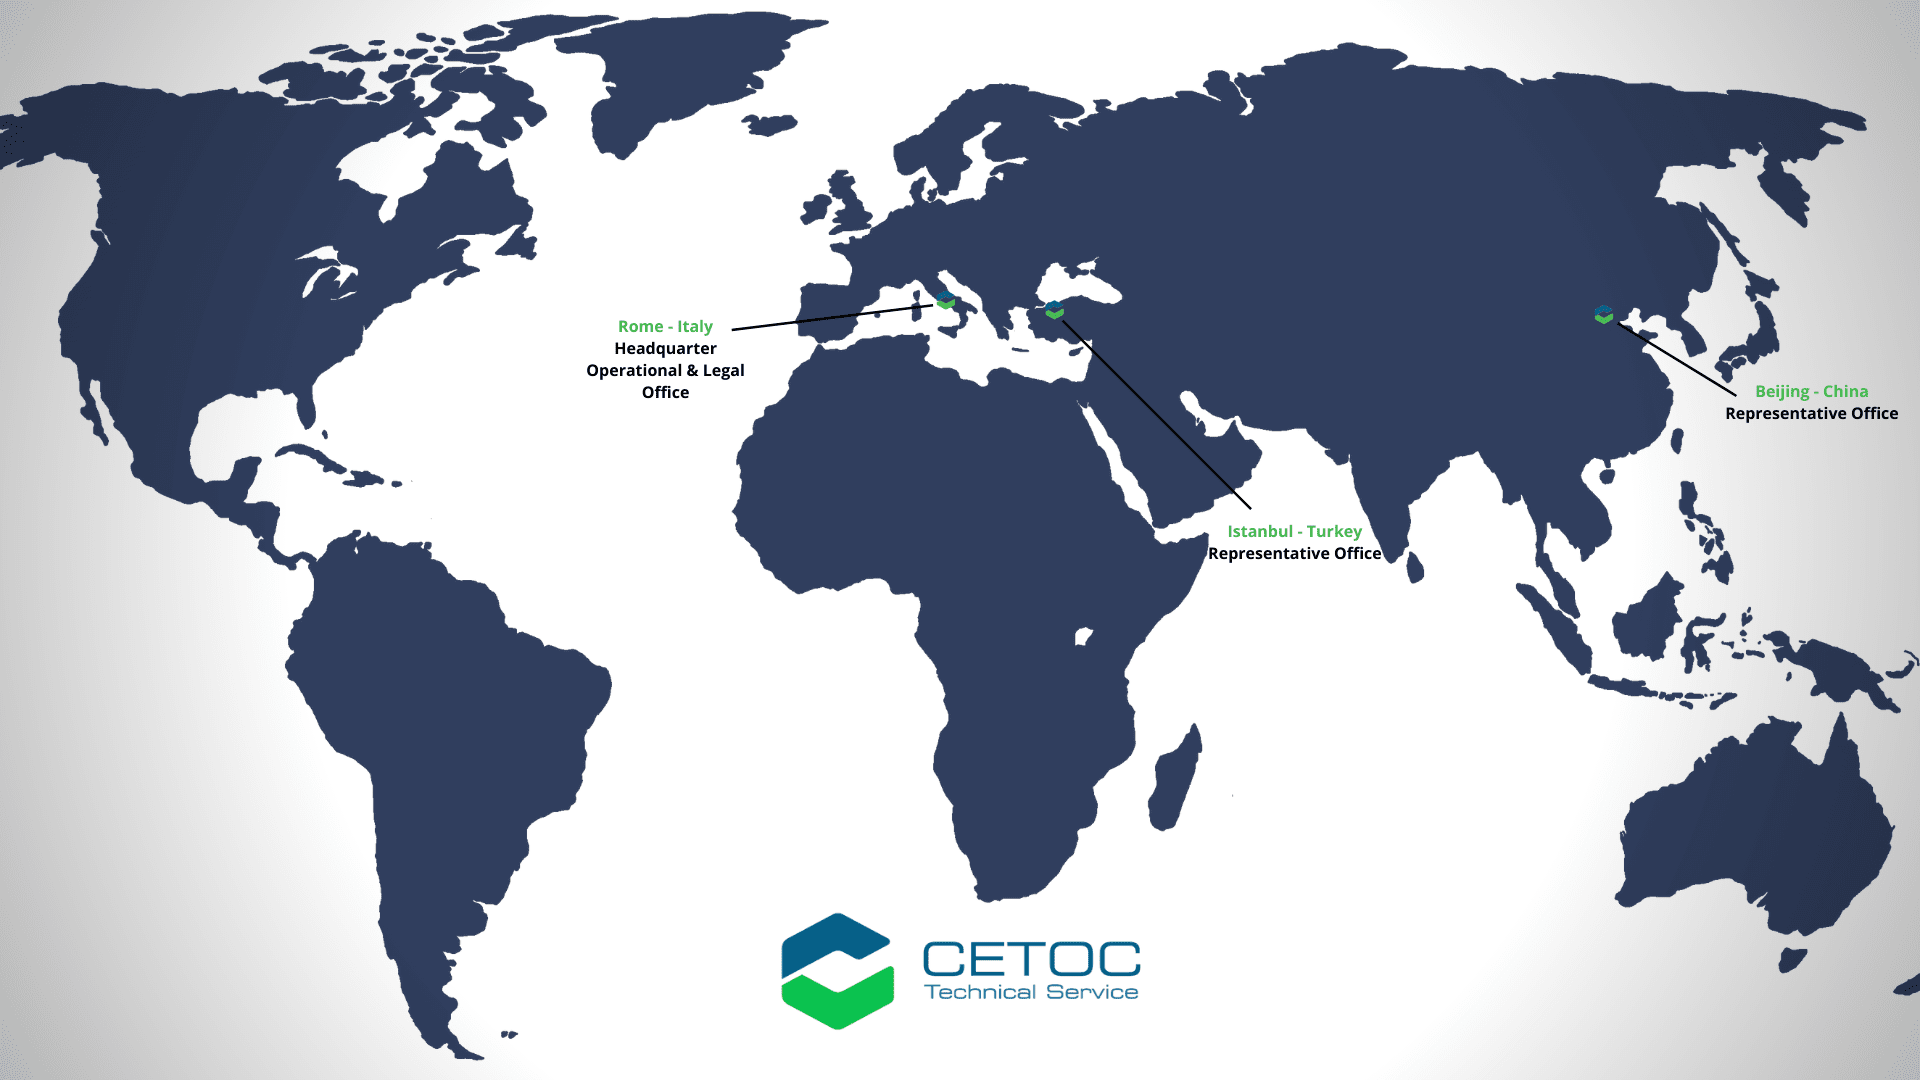 World Map - Headquarter and Offices - CETOC TS - Technical Service - Rome - Italy